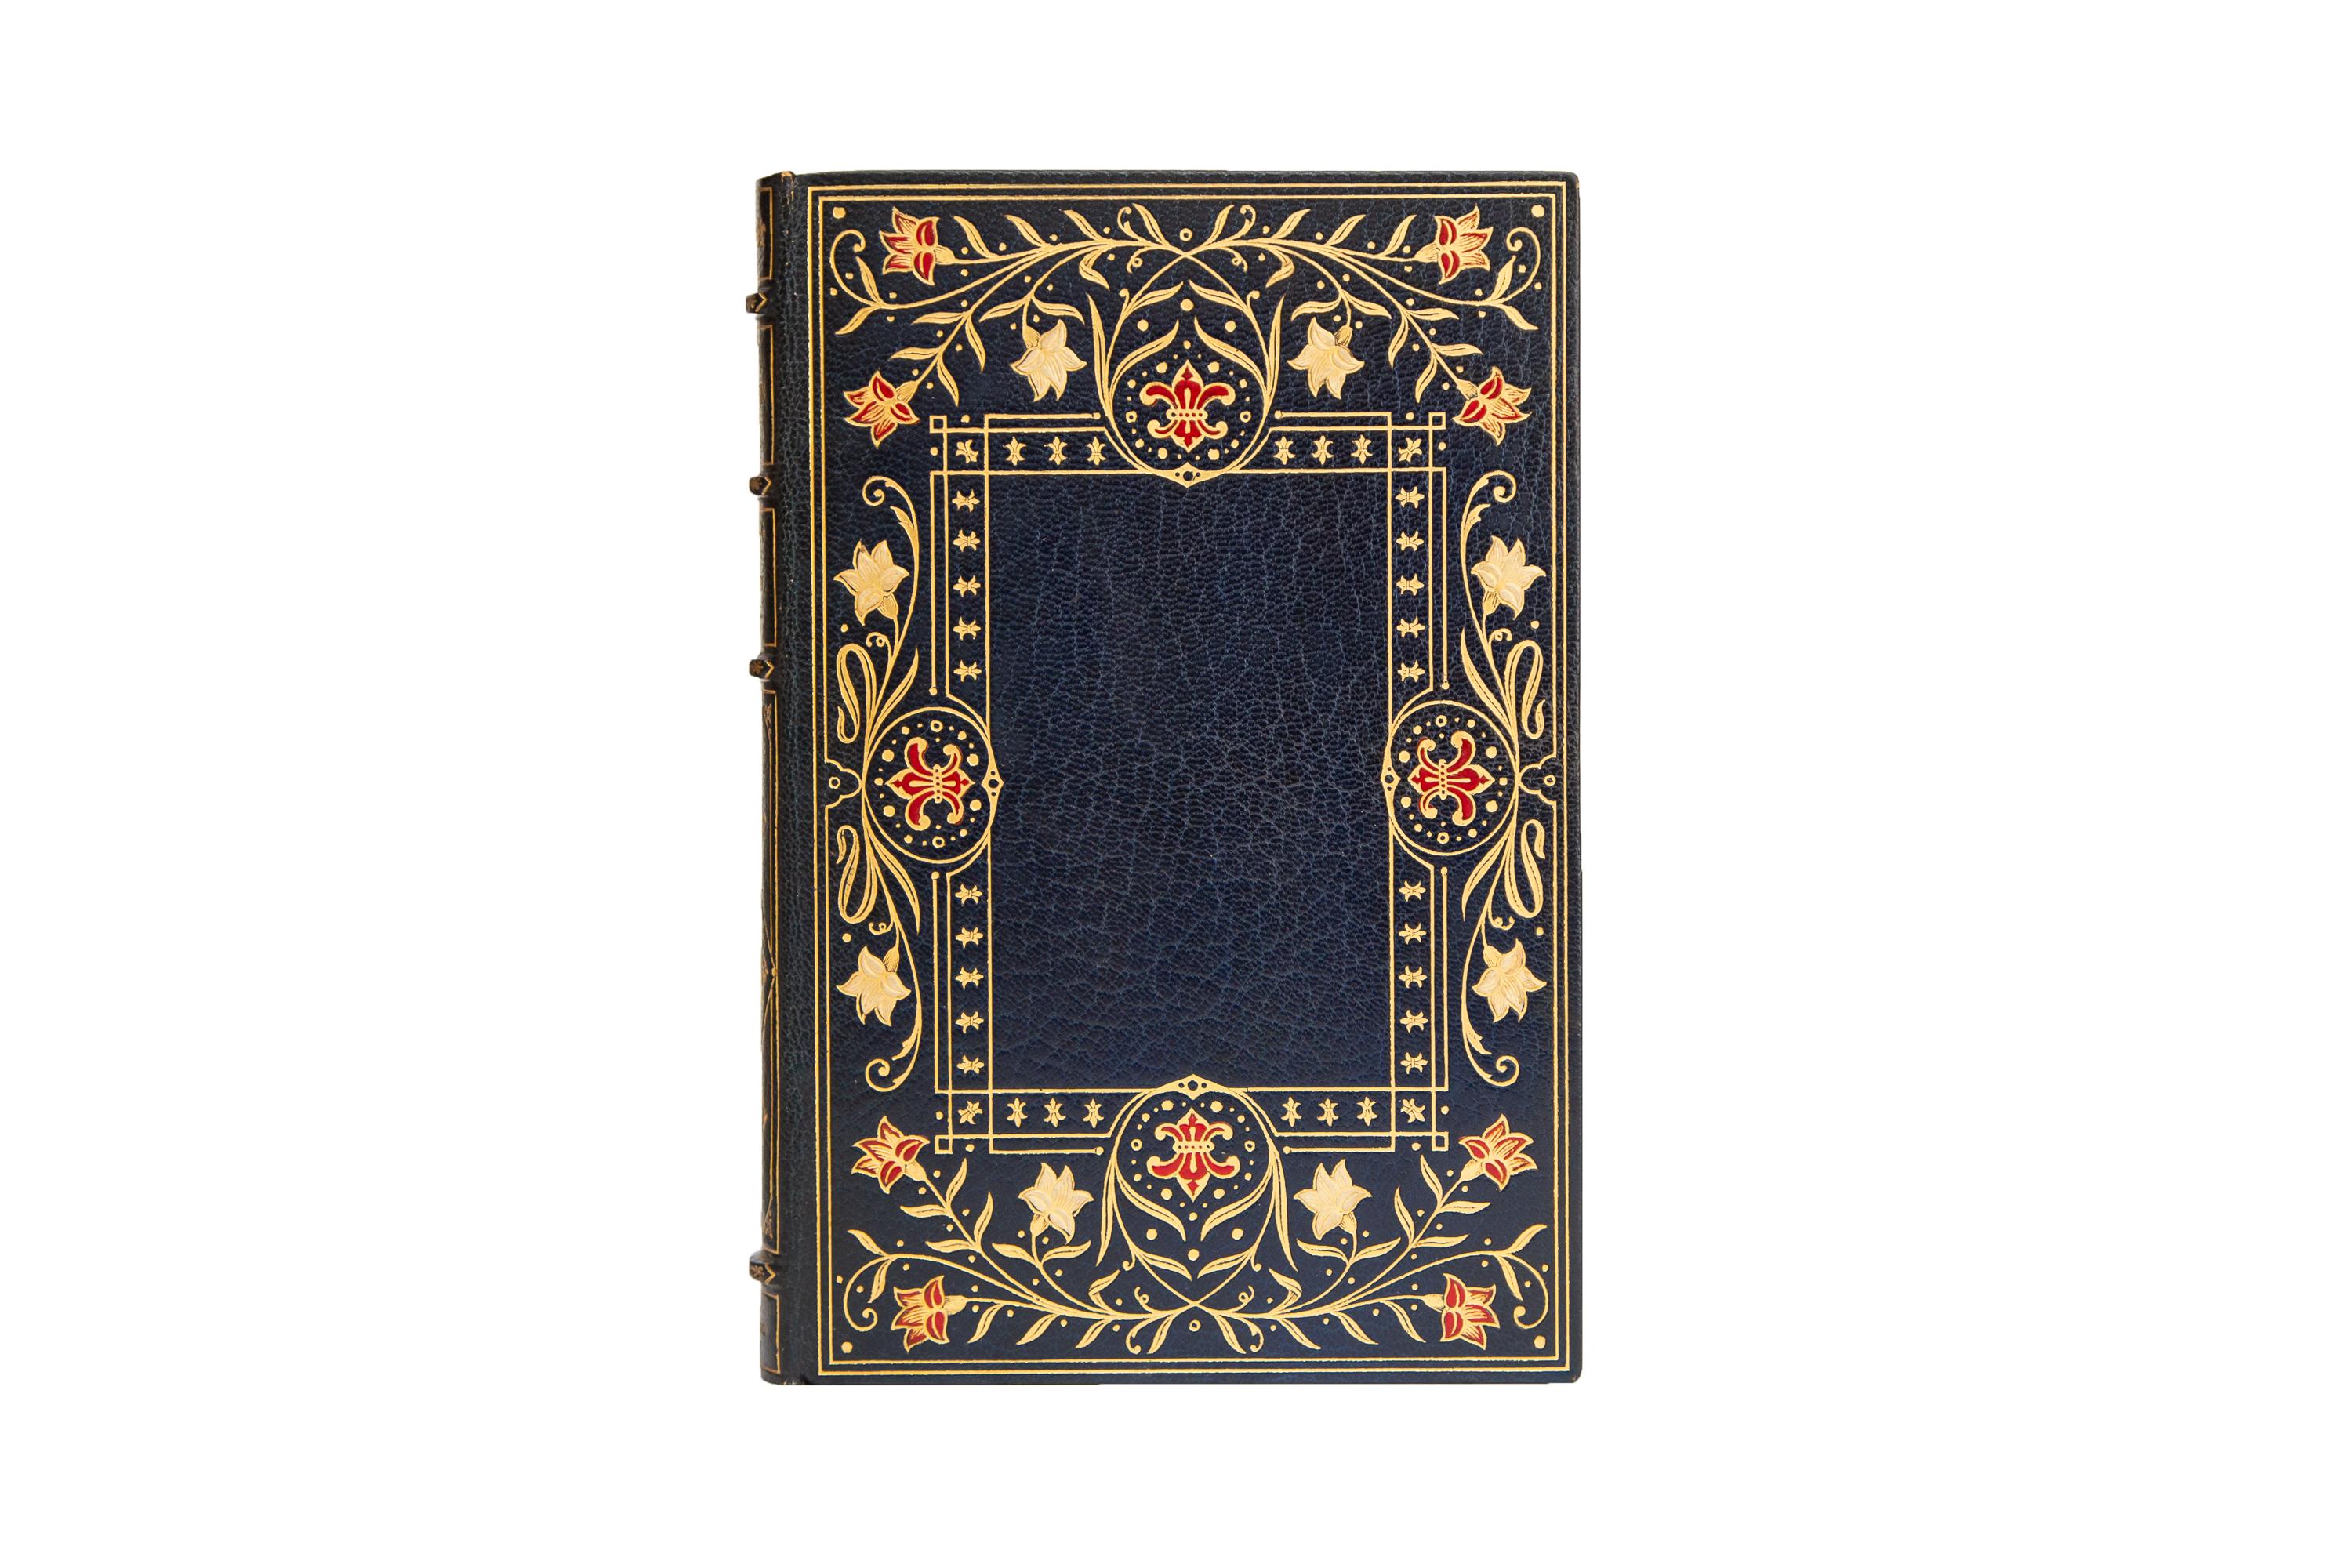 32 Volumes. Louis Bourienne, The Life of Napoleon; William Hazlitt, Memoirs of Napoleon; and Madame Junot, Duchesse De D'abrantes, Memoirs; [NAPOLEON]. London: H.S. Nichols, circa 1900. Number 3 of 5 extra-illustrated sets, with original documents